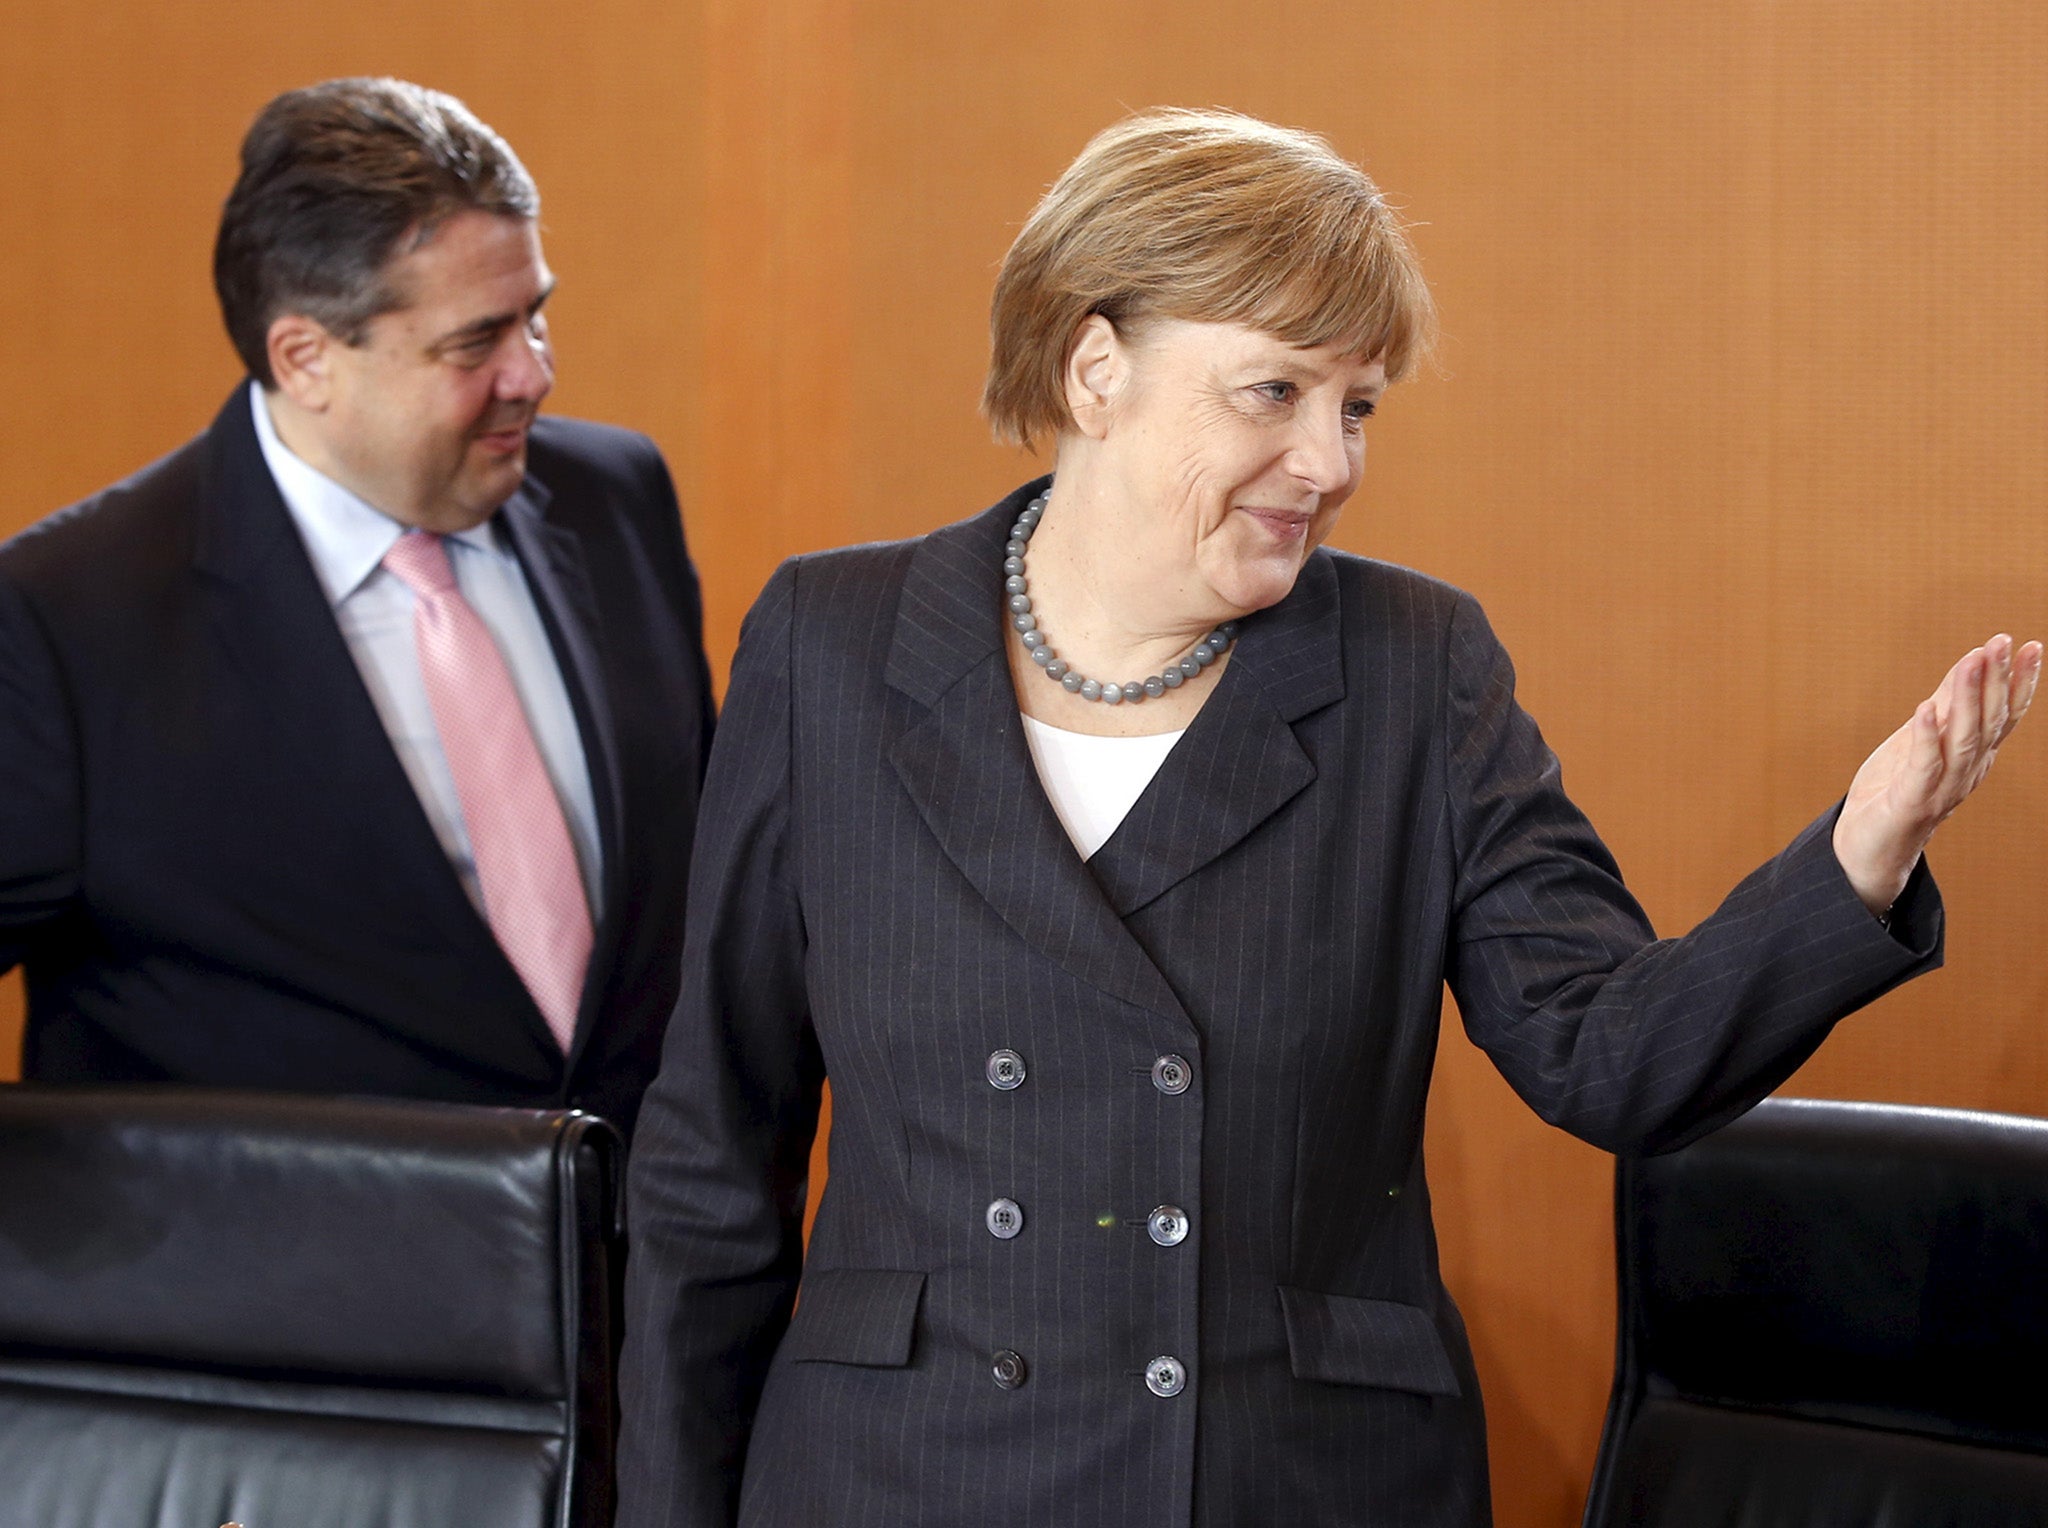 German Chancellor Angela Merkel with her coalition partner Sigmar Gabriel. Germany has been cool on TTIP recently